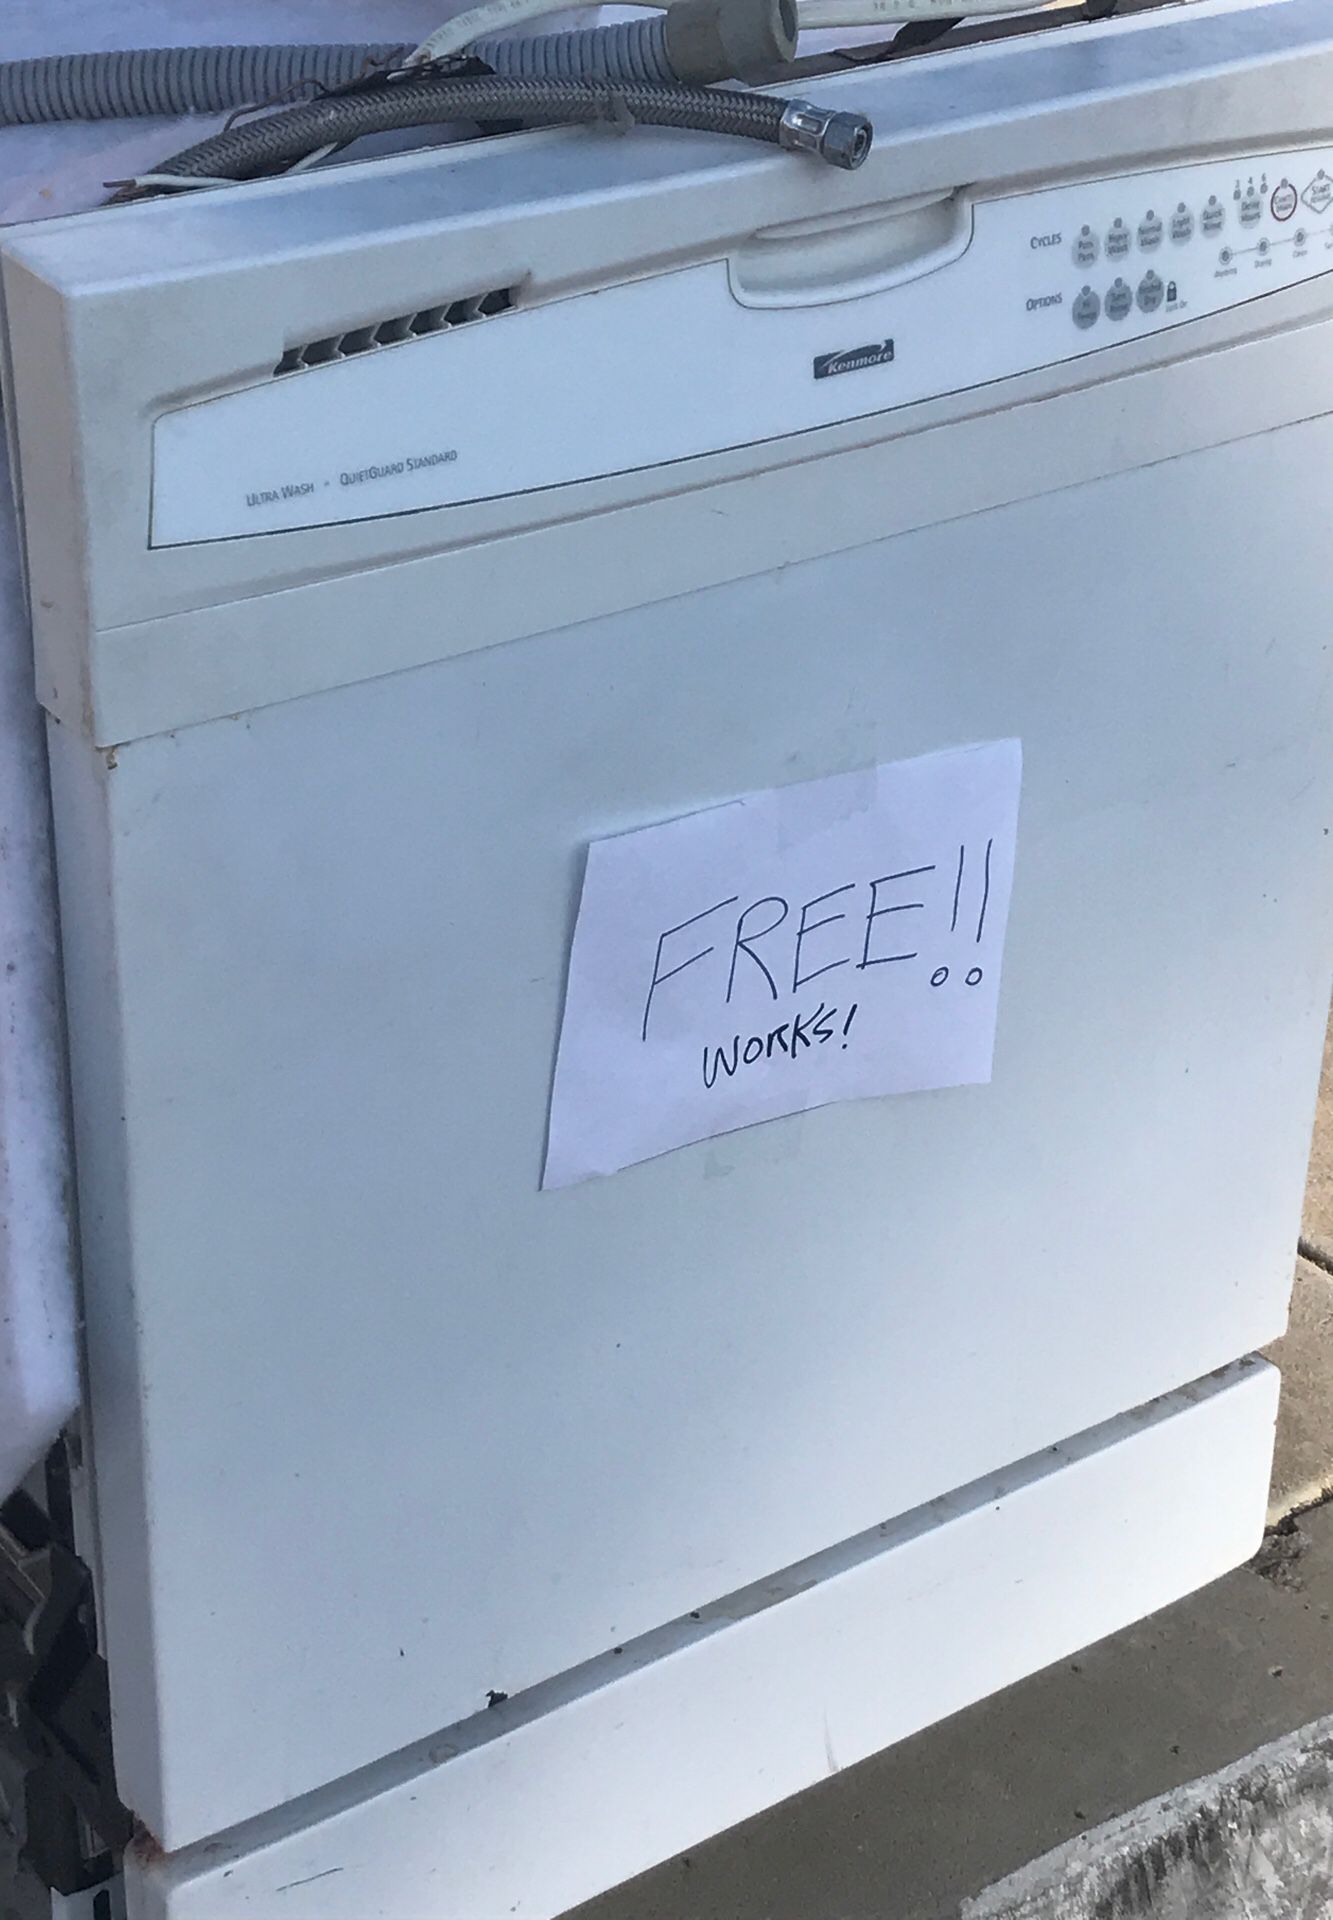 Free Kenmore Dishwasher! Hurry before it’s gone!